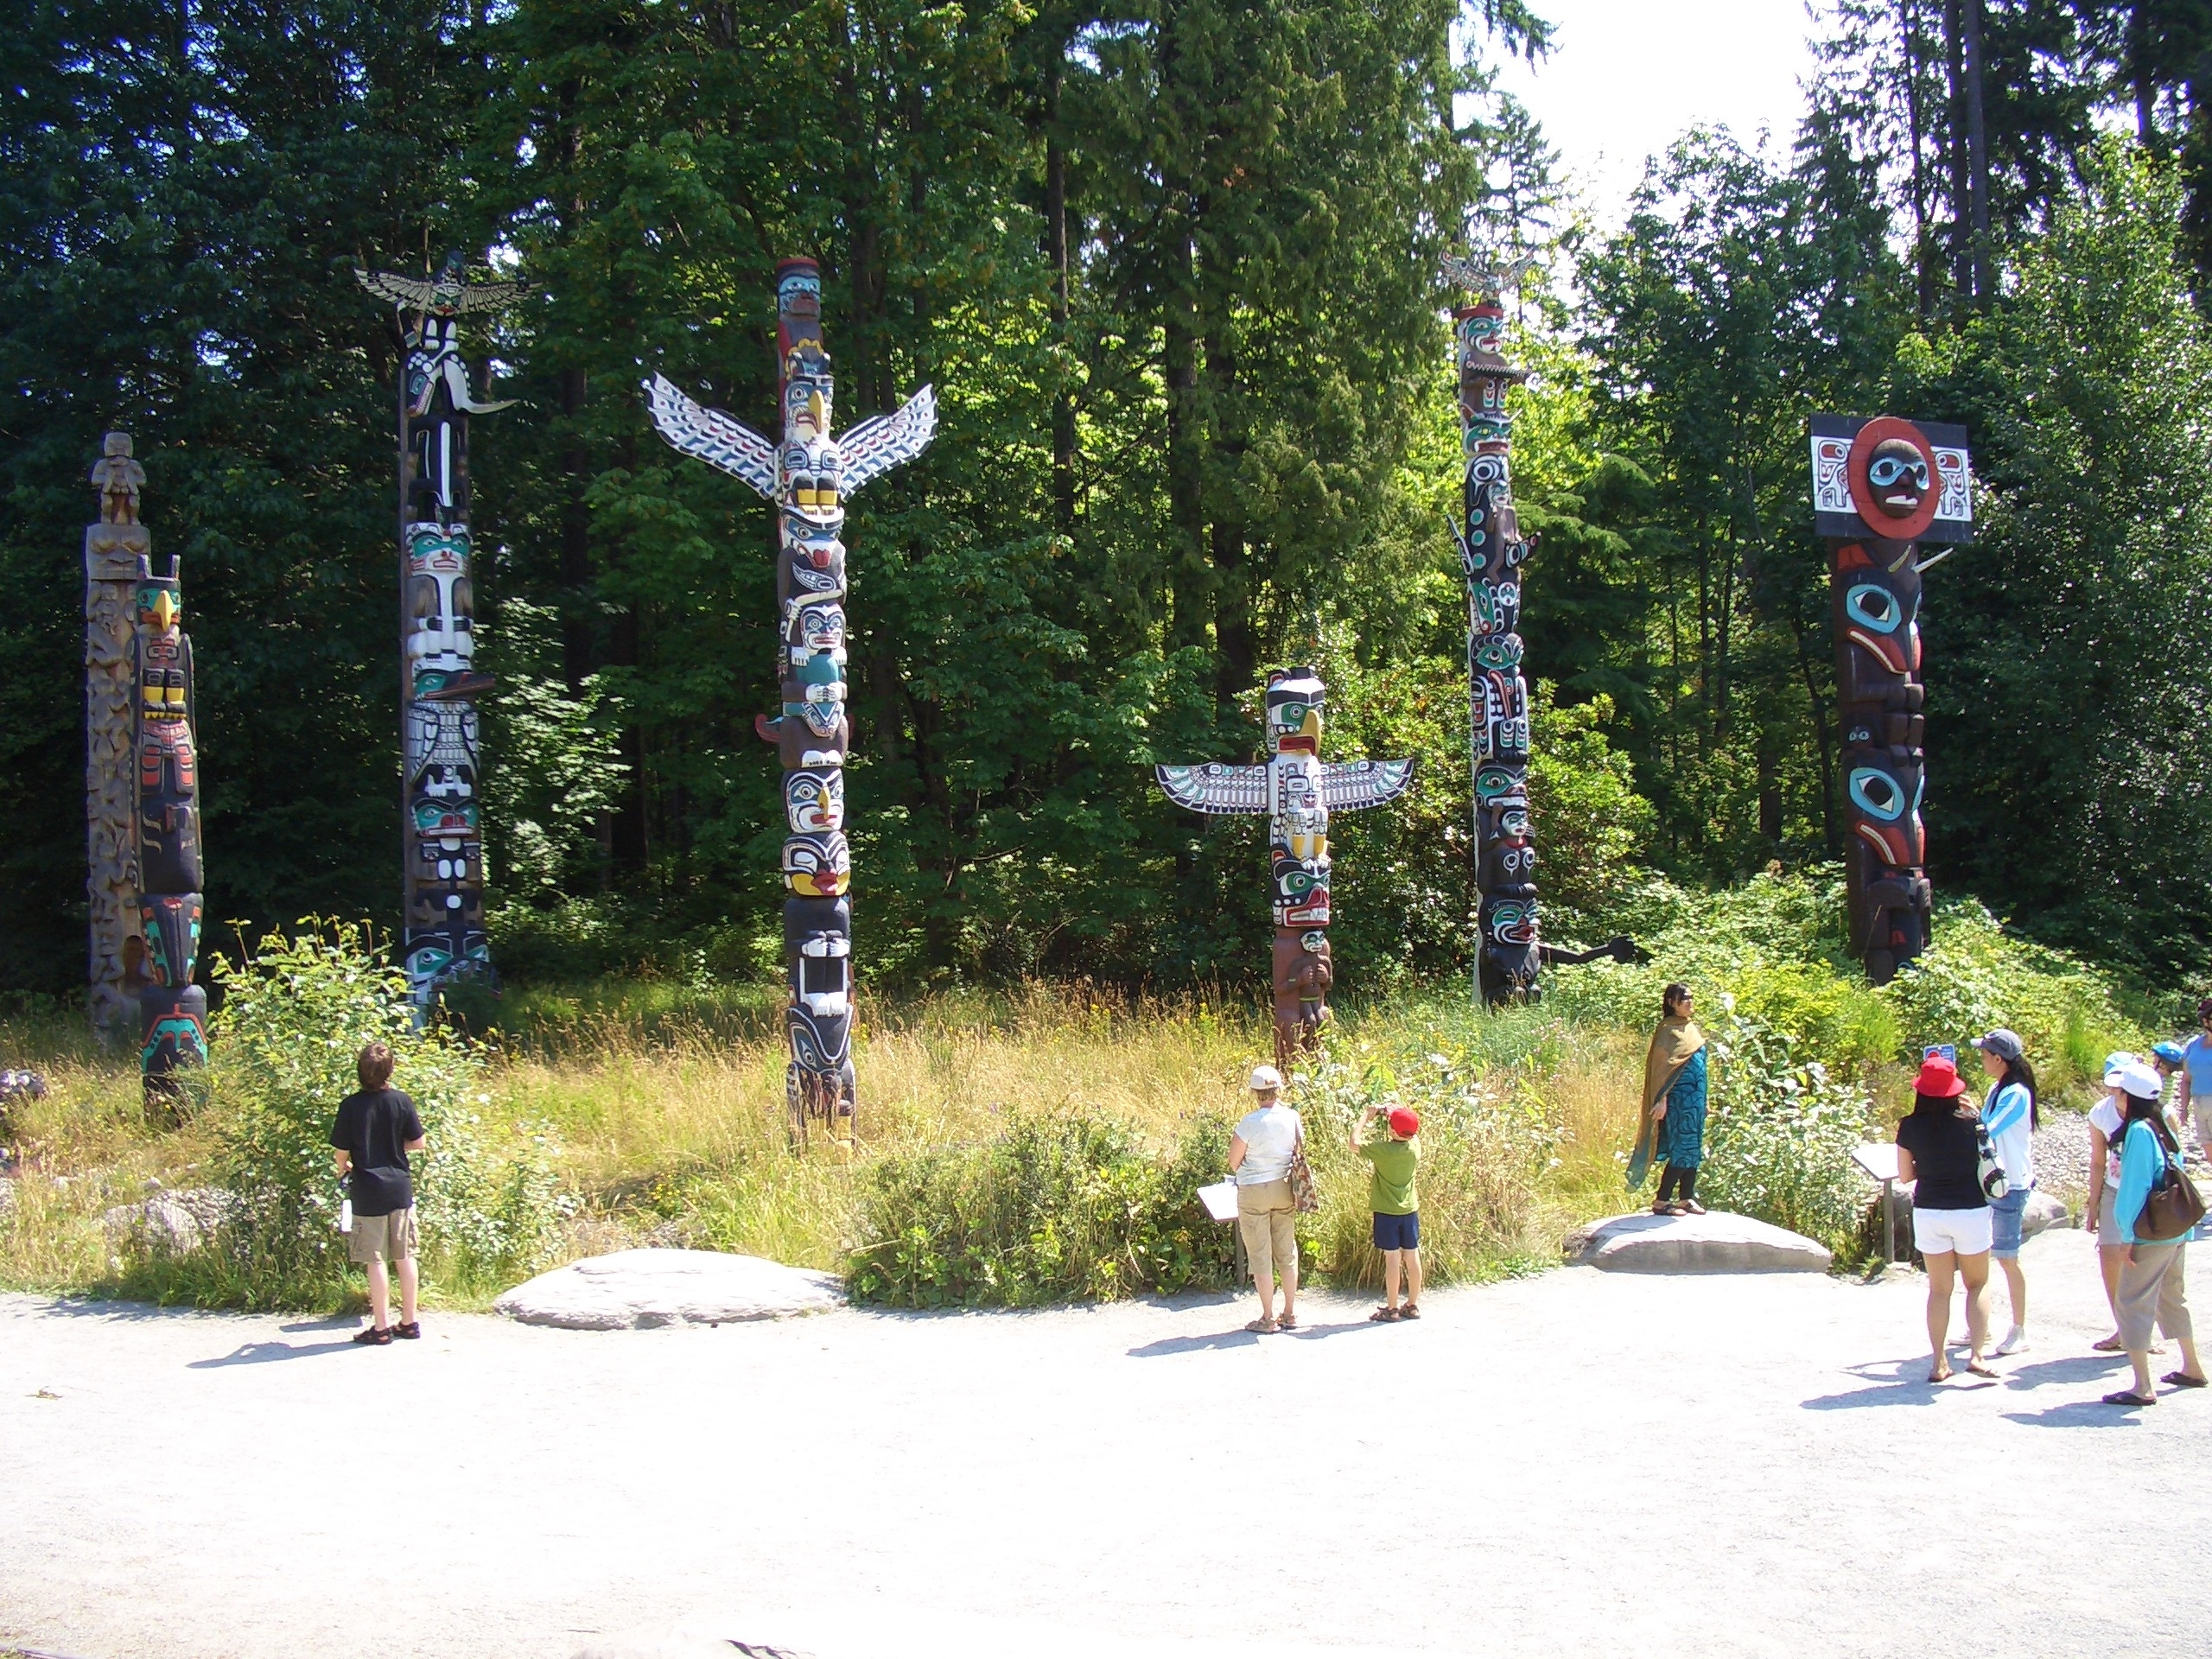 Totems in Stanley park